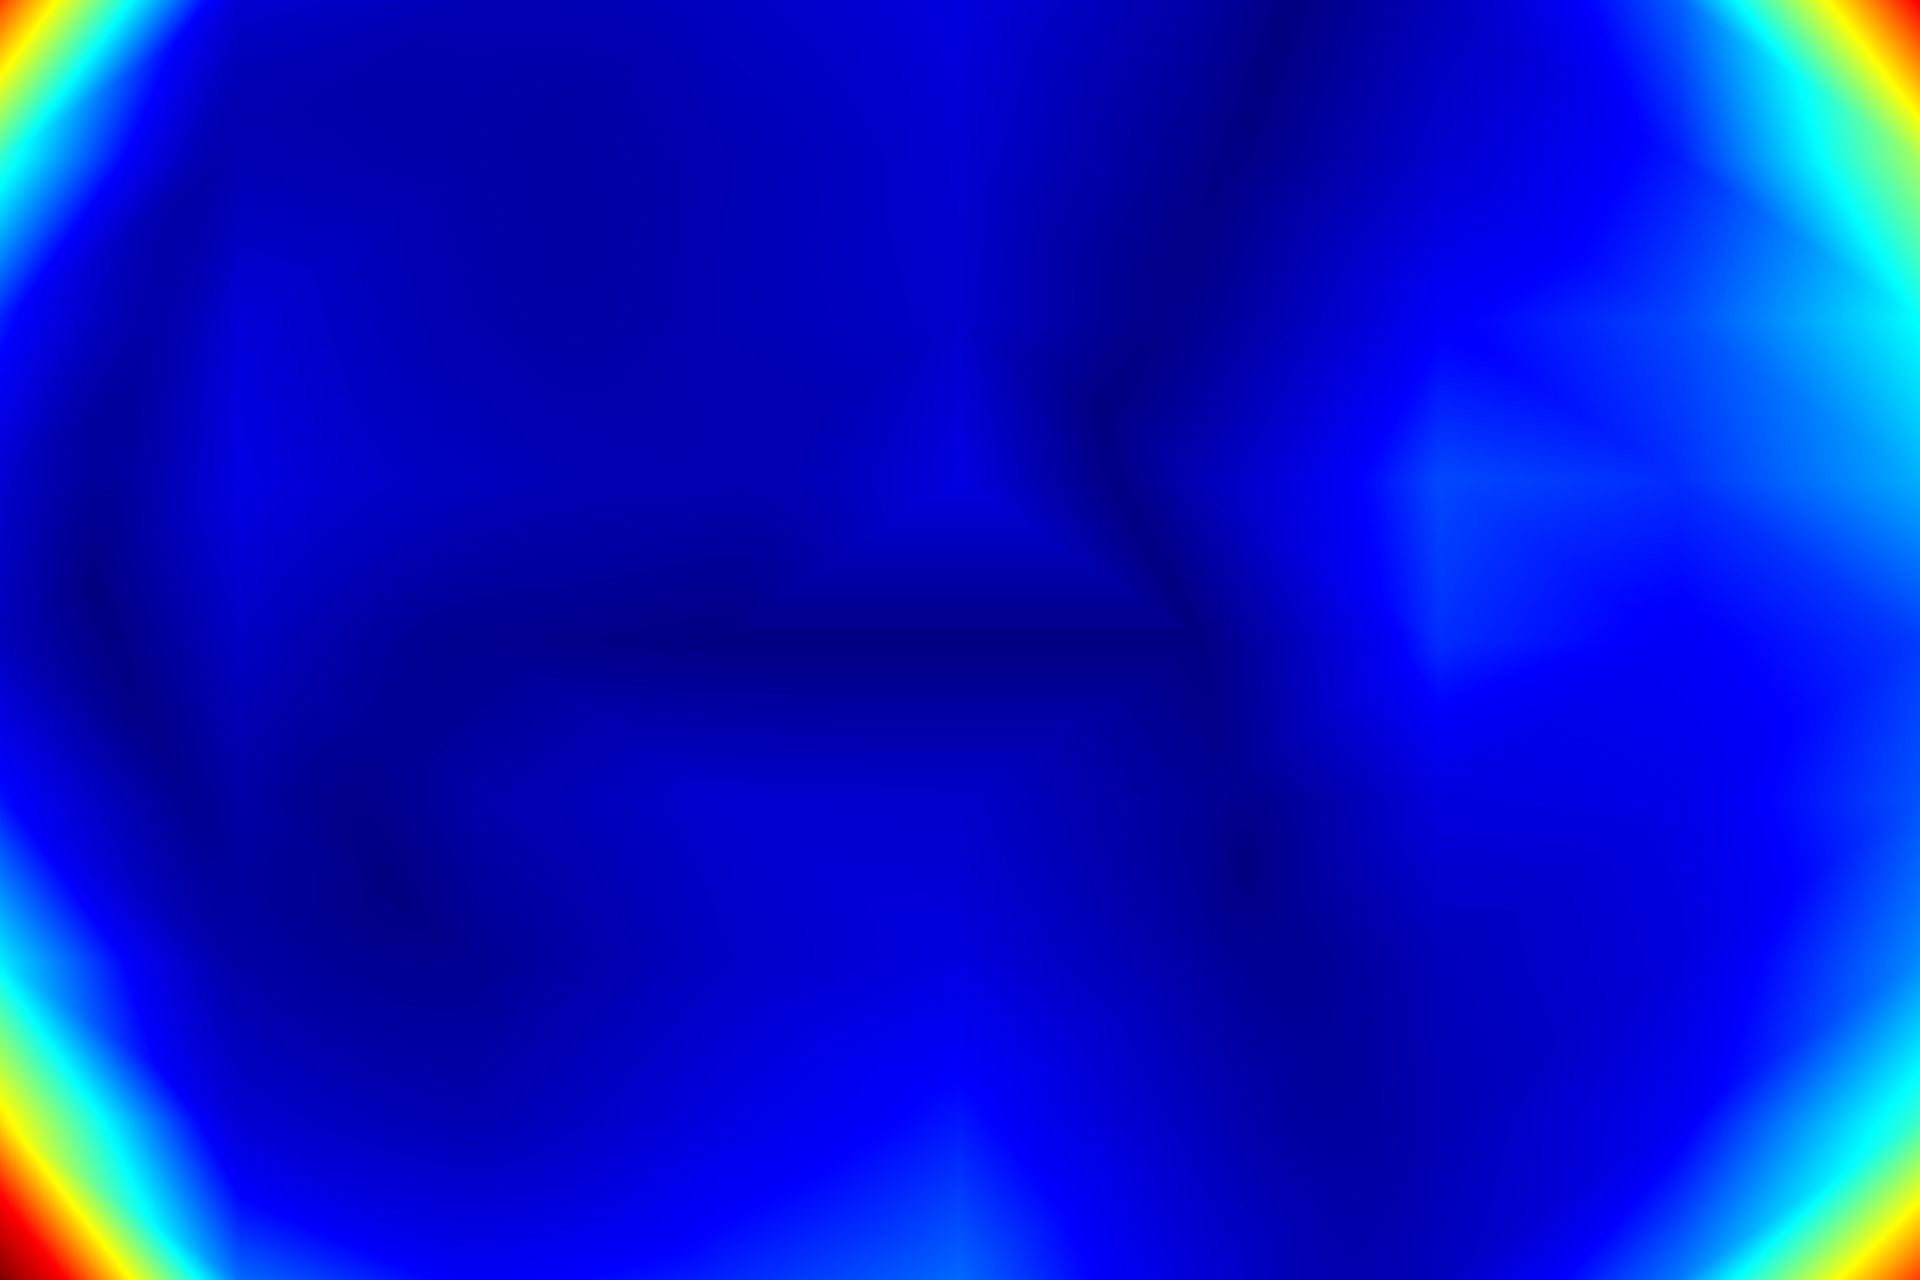 Heatmap of an image showing a large amount of distortion in the corners.